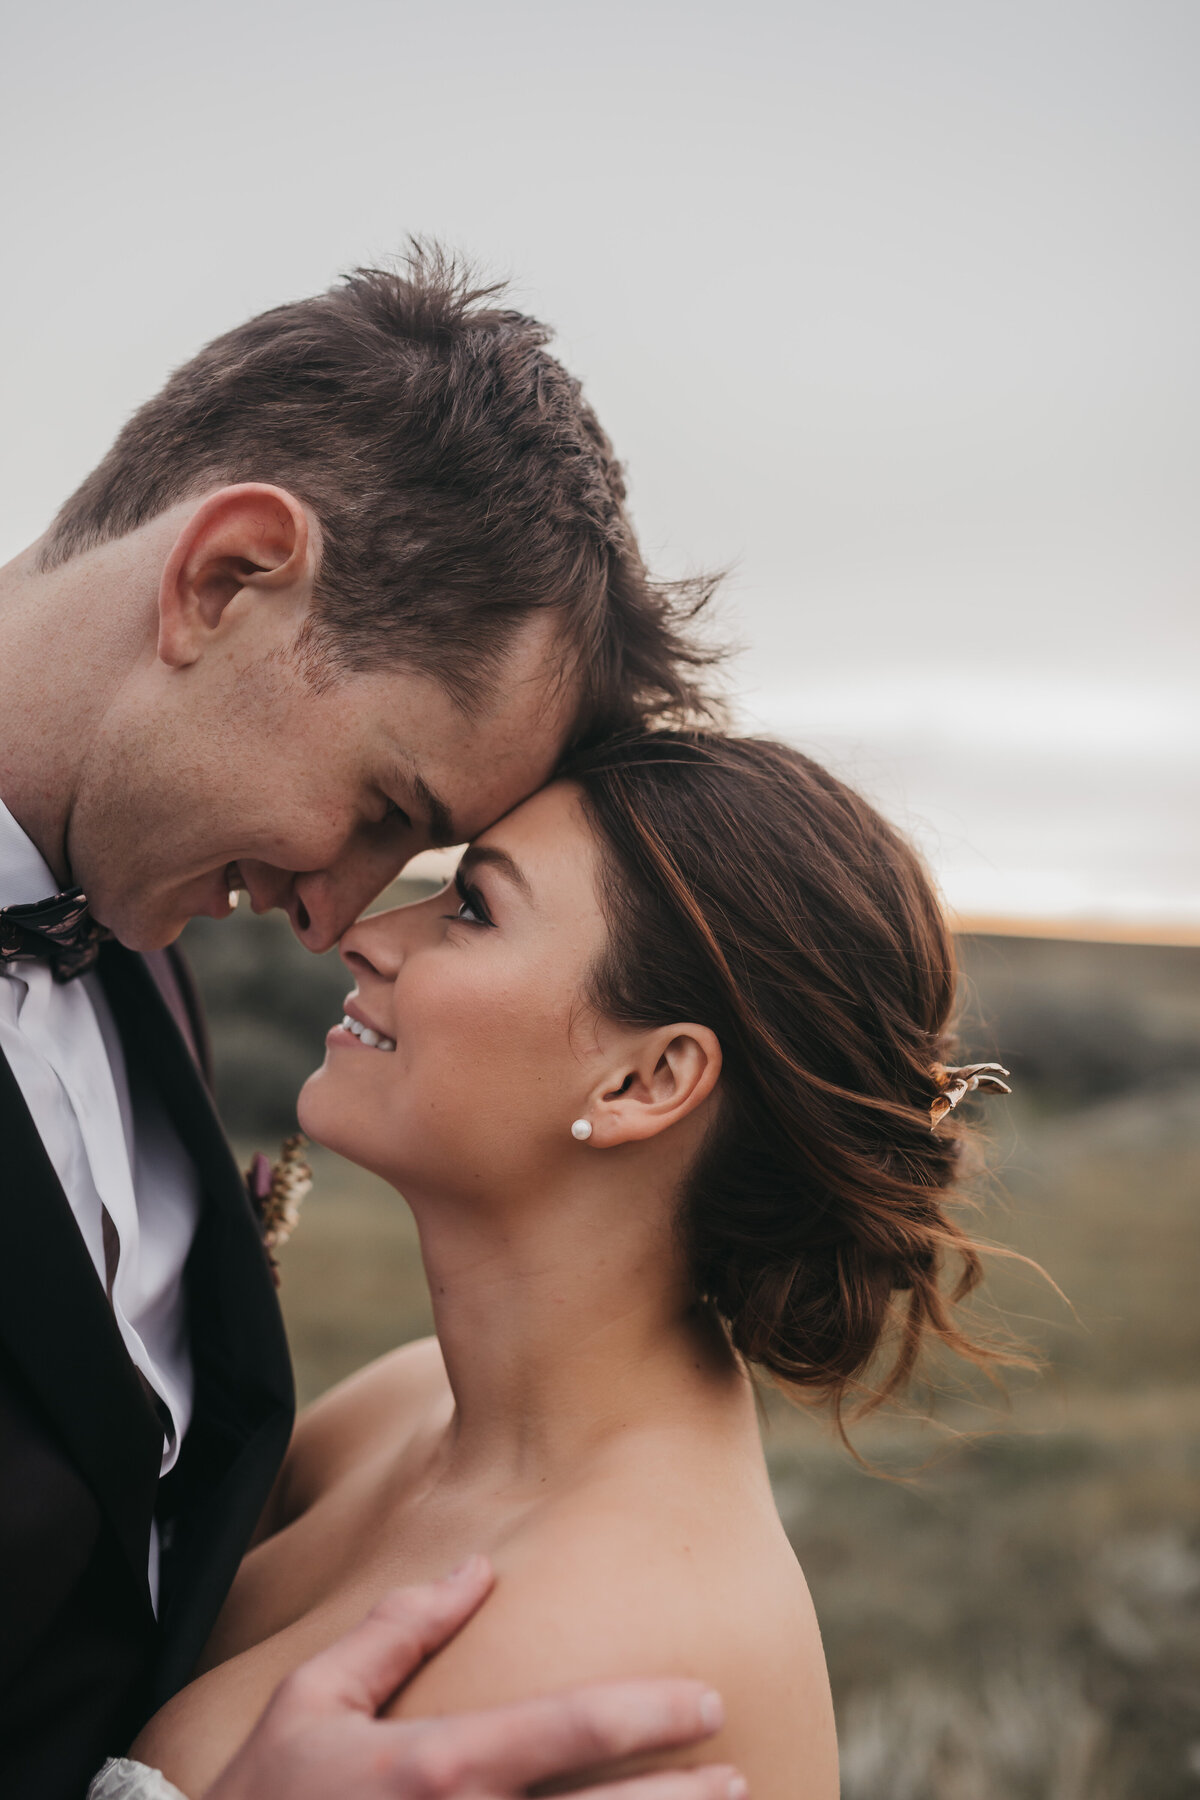 Stunning bridal hair and makeup by Madi Leigh Artistry, experienced and inclusive Calgary hair & makeup artist, featured on the Brontë Bride Vendor Guide.